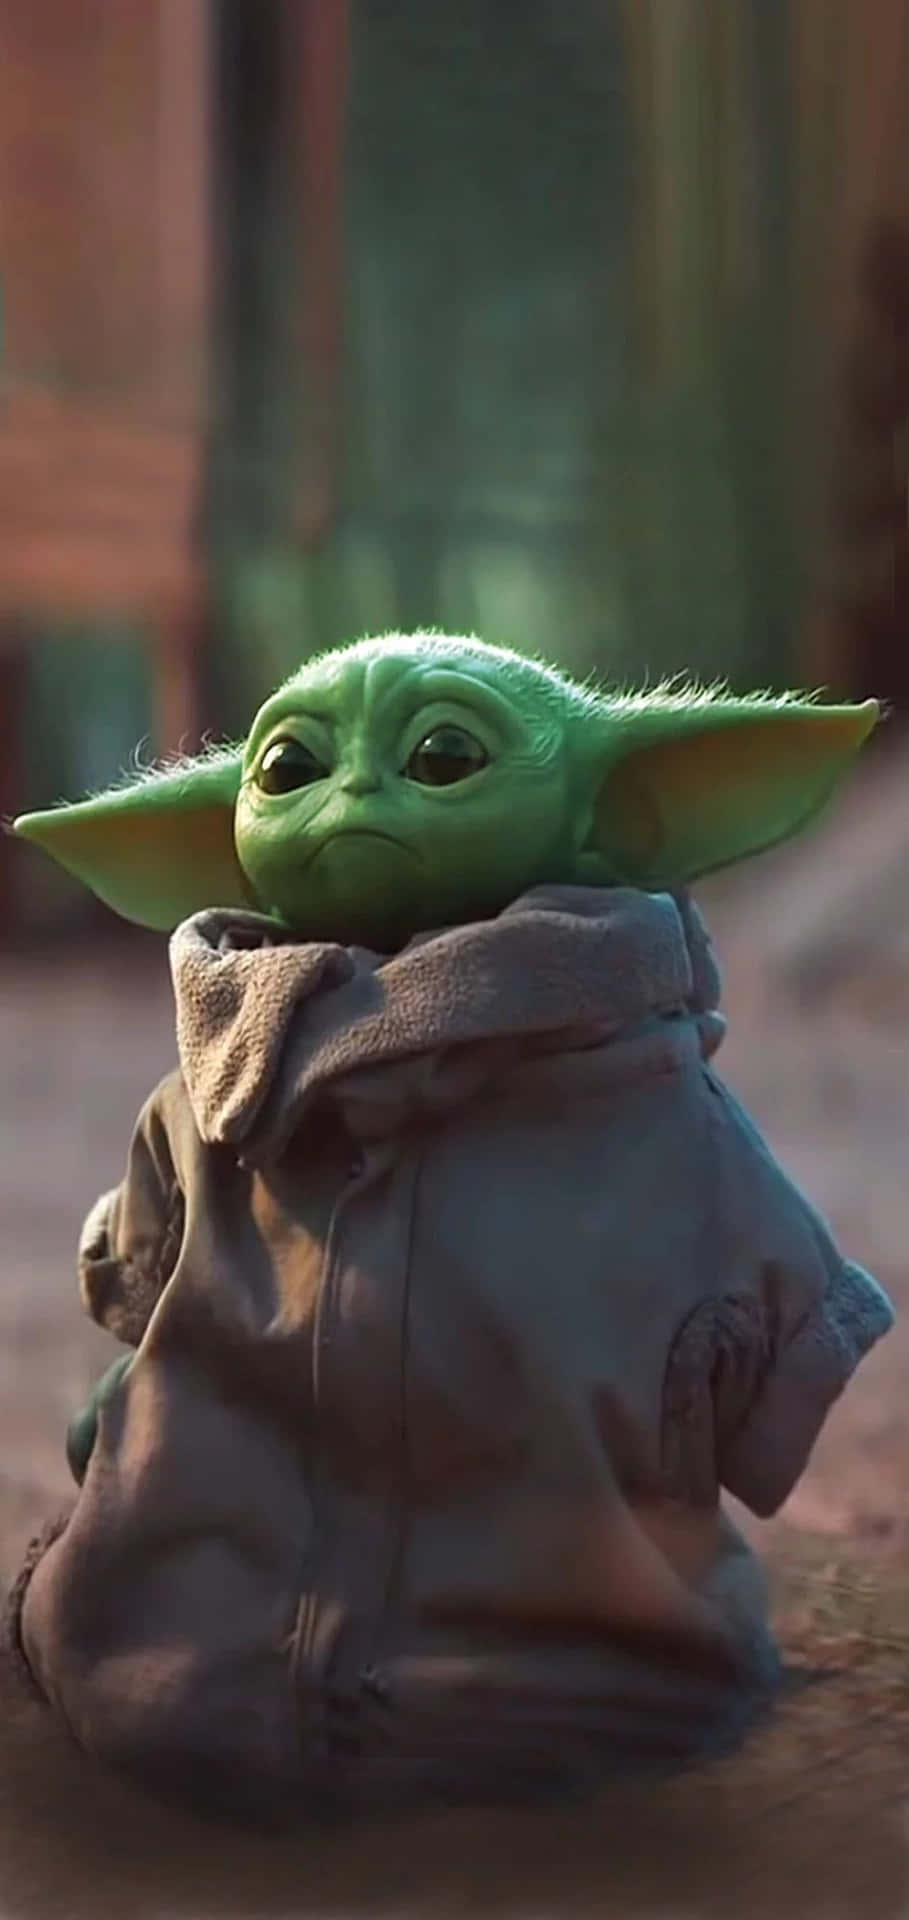 "Where the force is strong, Baby Yoda follows"